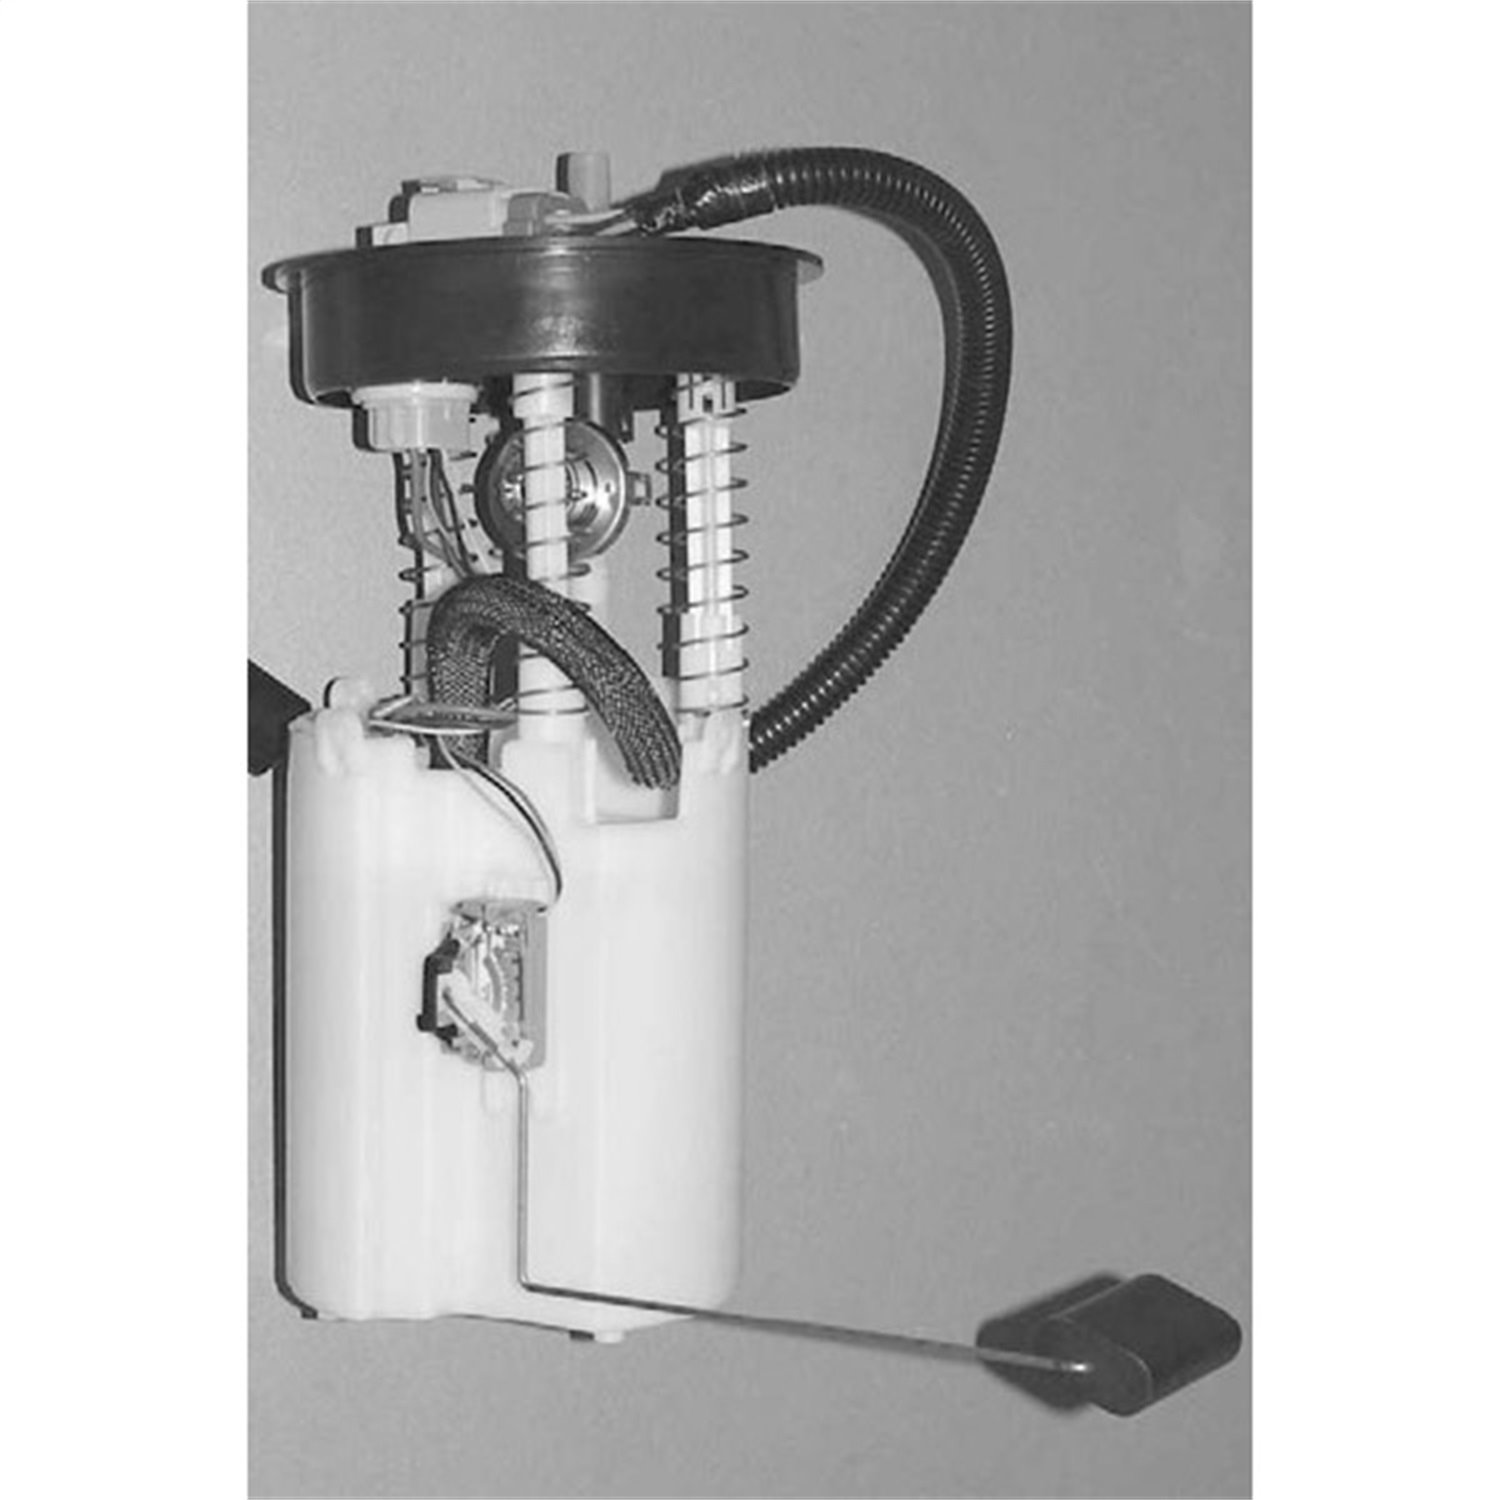 Replacement fuel pump module from Omix-ADA, Fits 1995